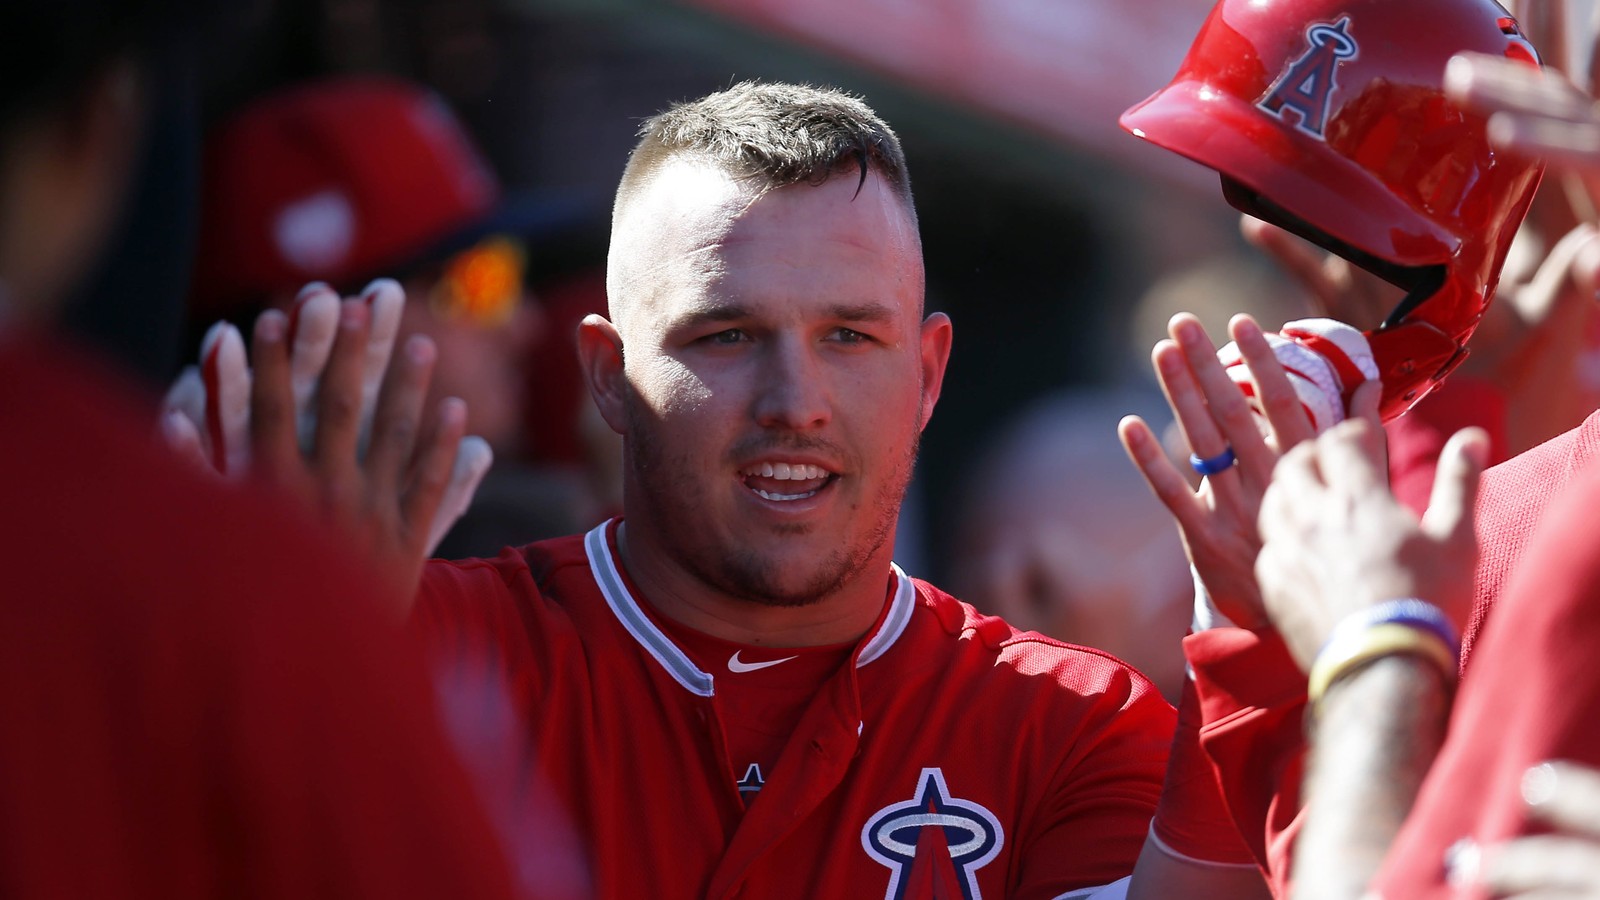 Mike Trout: The Best Baseball Player Of His Generation